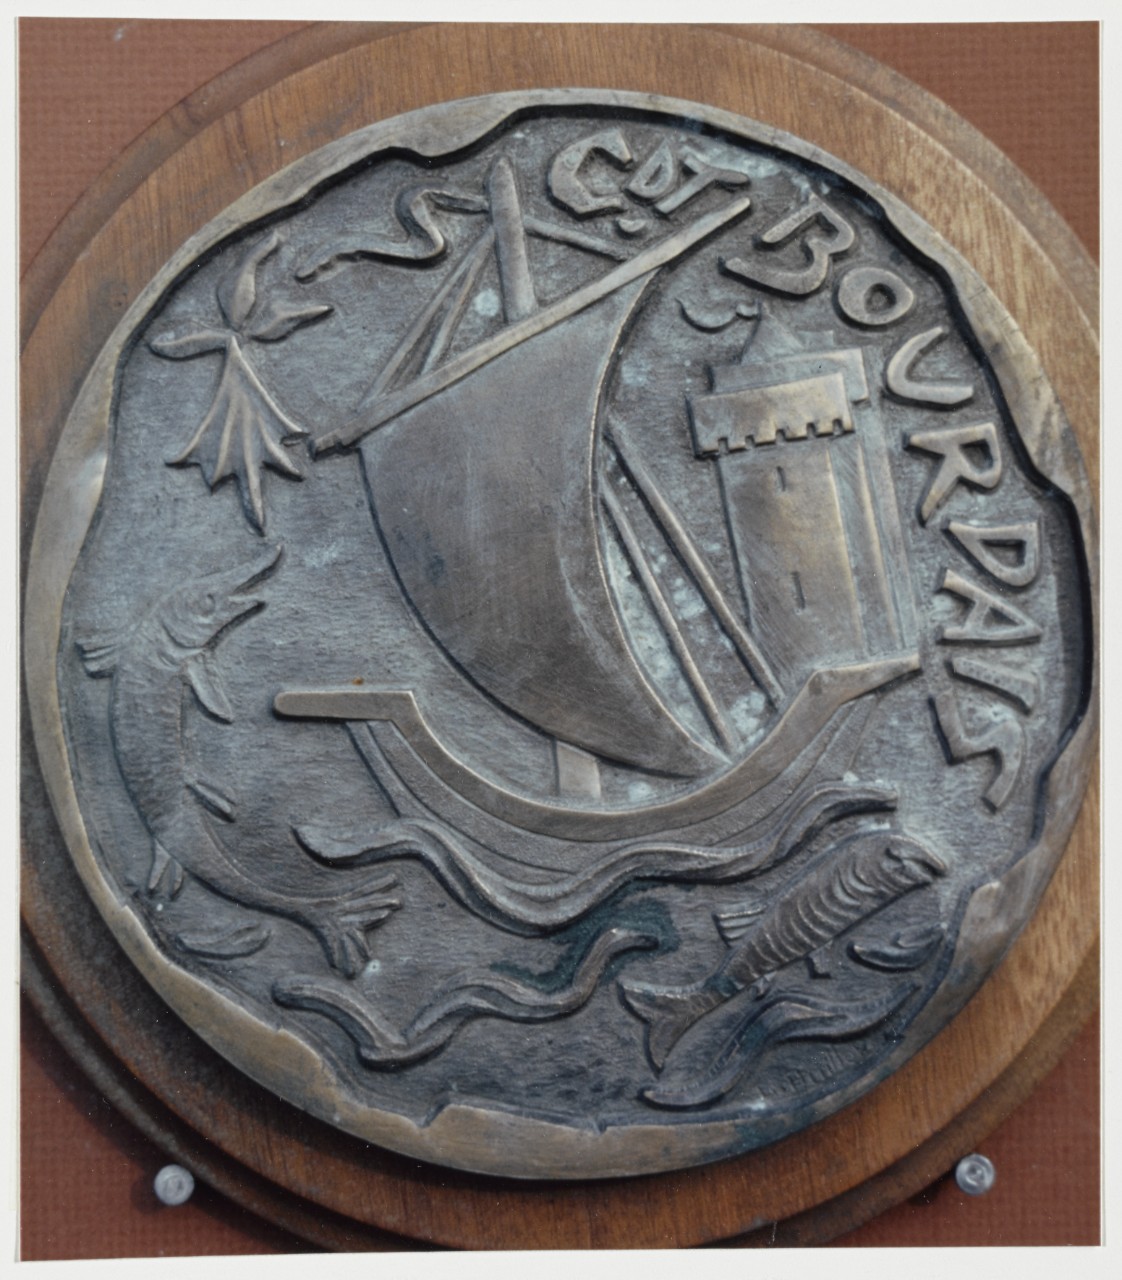 Insignia: Commandant Bourdais (French Frigate, 1961) Plaque received in 1976.